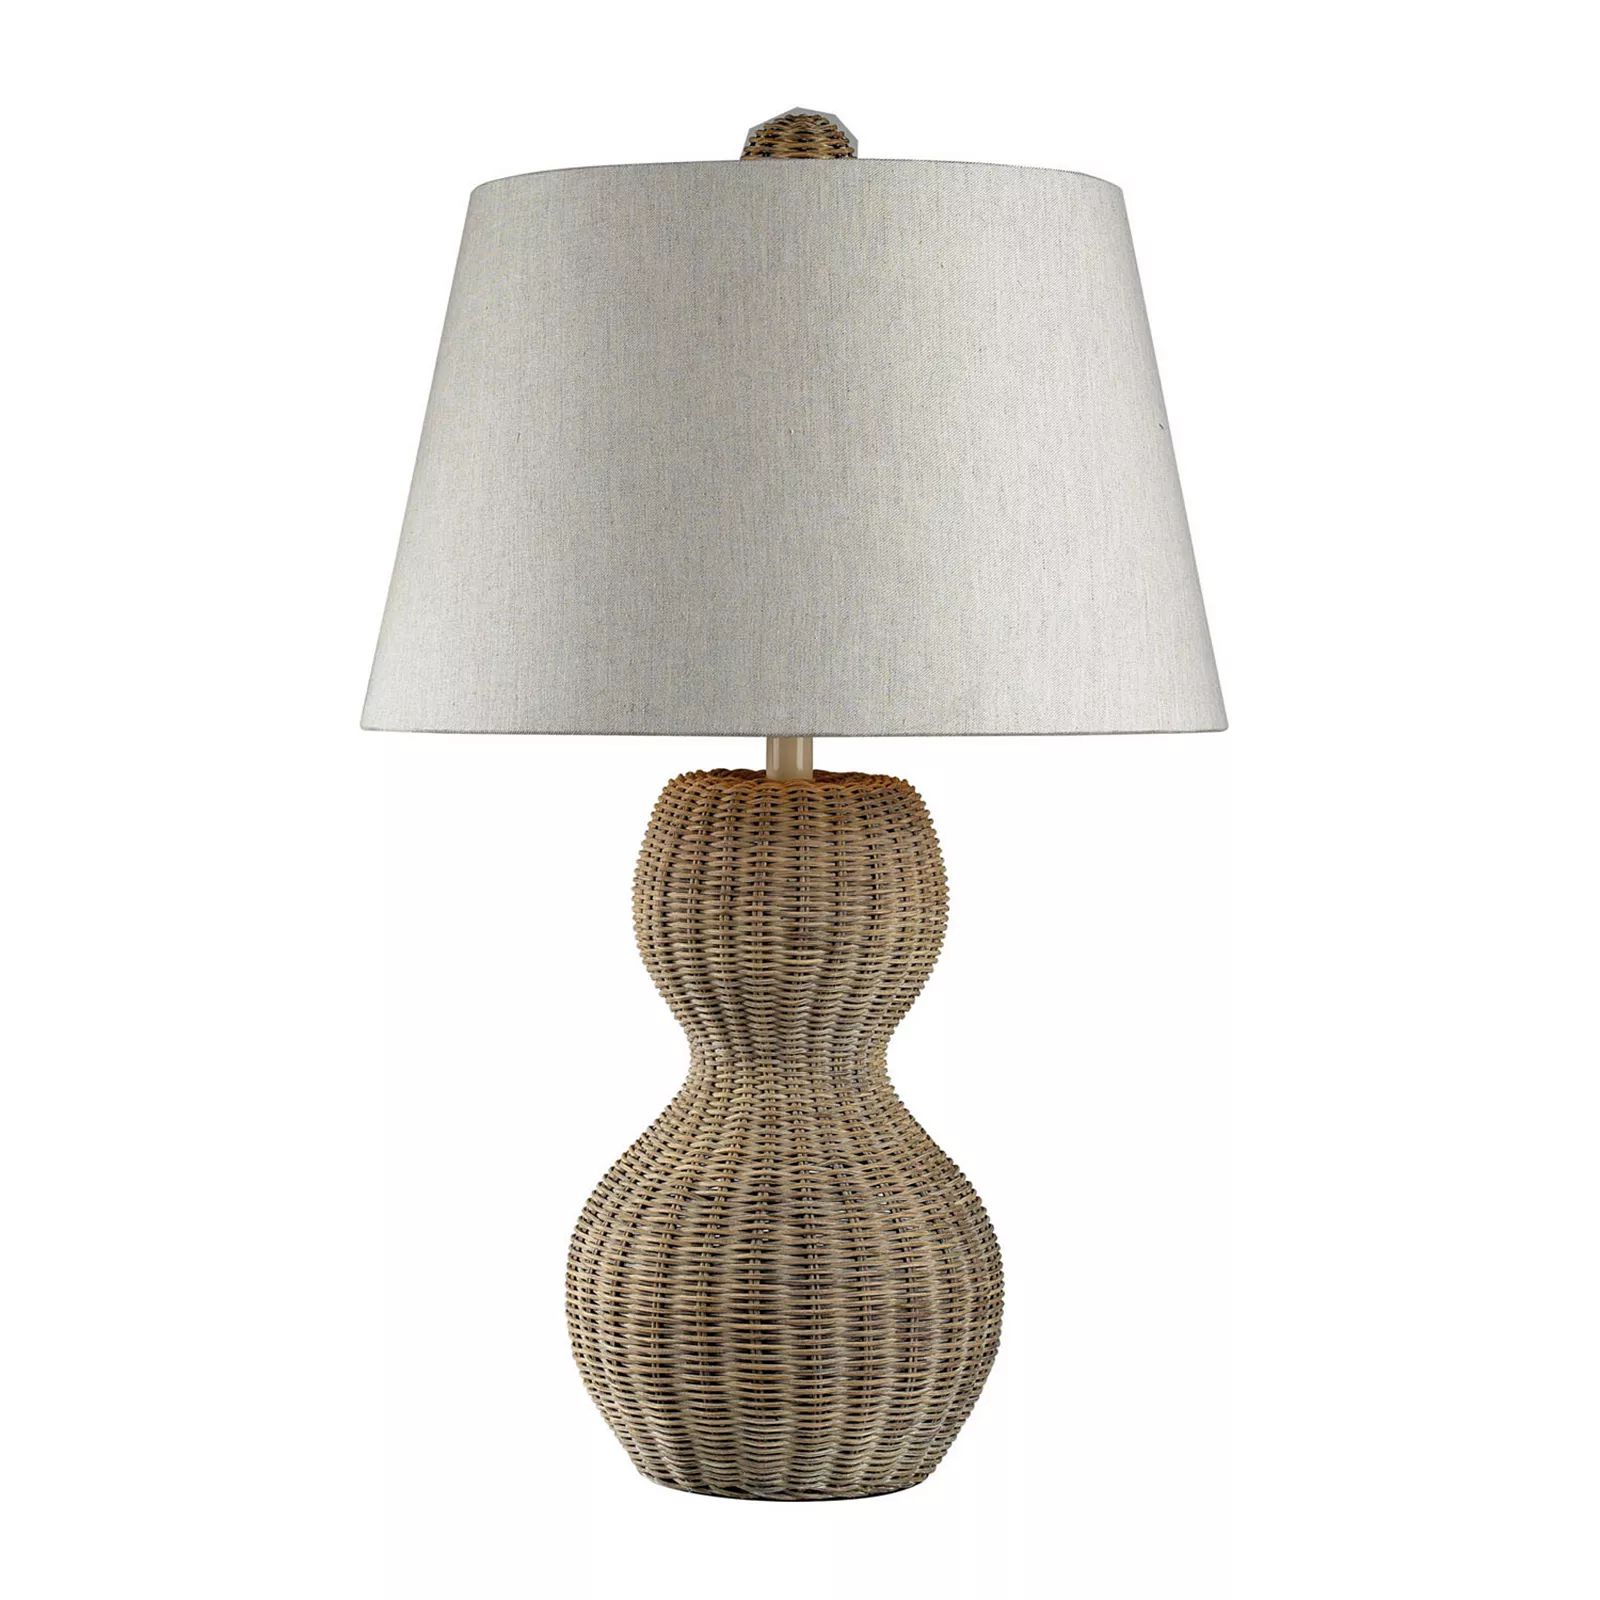 Dimond Sycamore Hill Rattan Table Lamp, Clrs | Kohl's